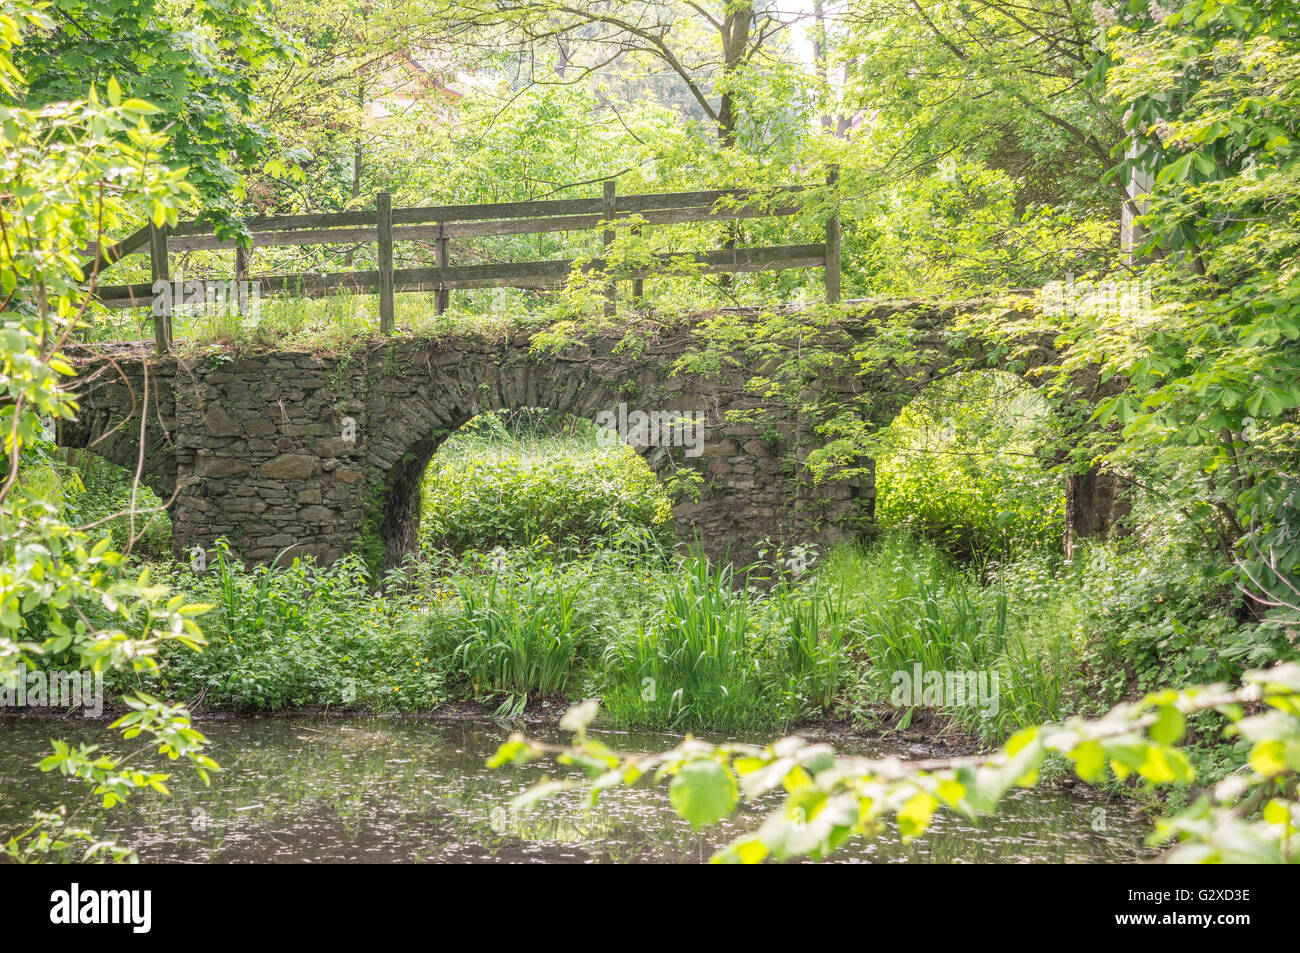 Ruined old stony bridge over the moat in the spring greenery Stock Photo